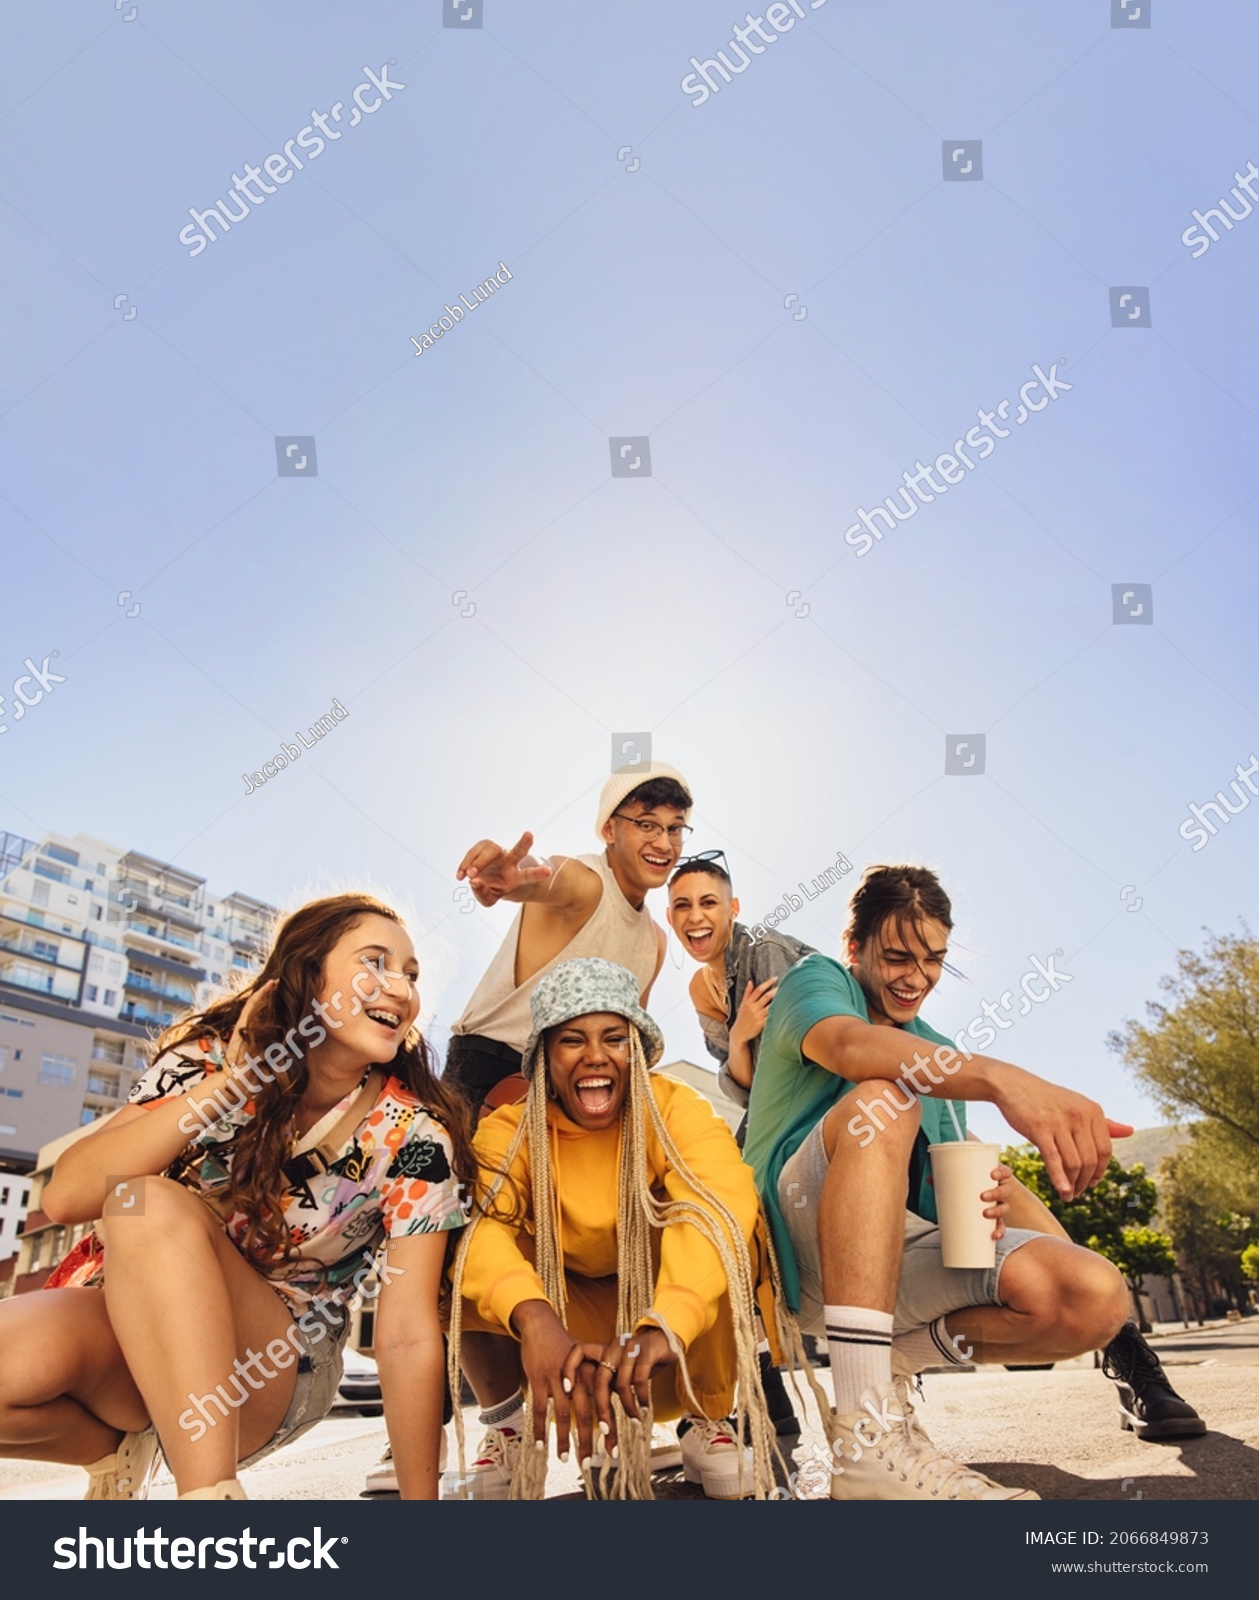 Diverse group of friends having fun in the city. Group of multiethnic generation z friends enjoying spending time together. Cheerful young friends making happy memories together outdoors. #2066849873